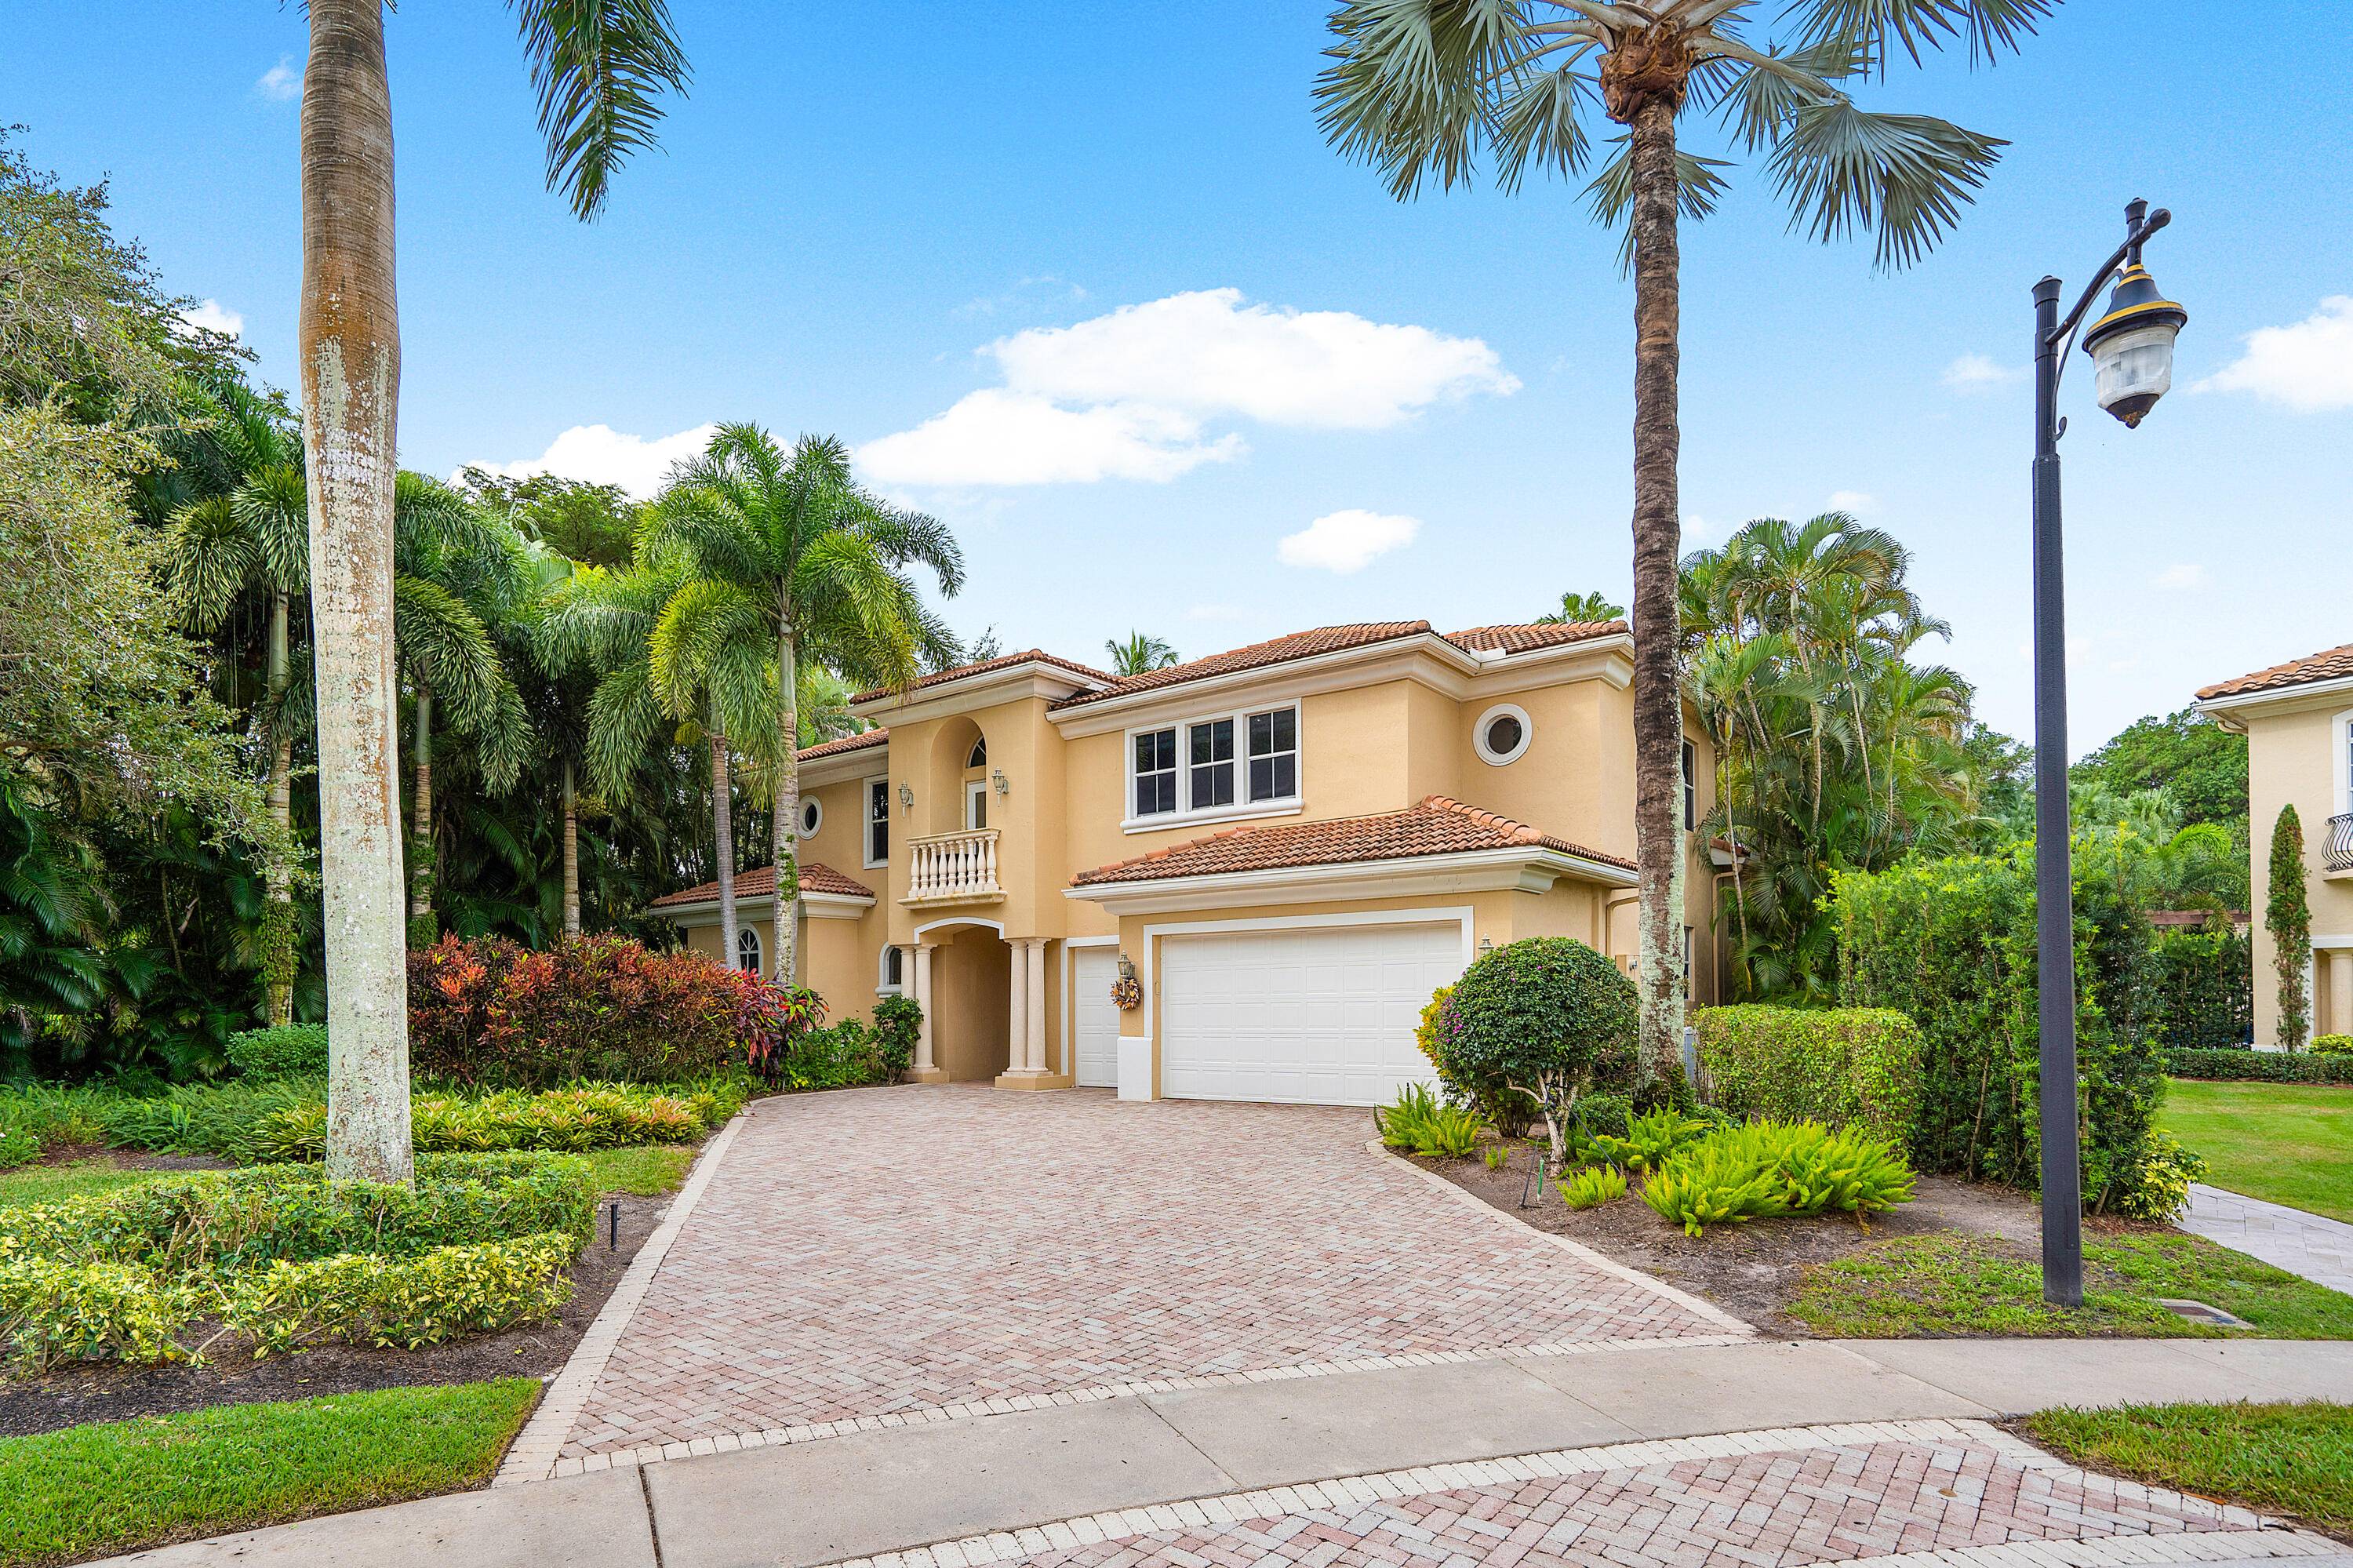 Beautiful two story courtyard home located in a cul de sac on an oversized lot in Mizner Country Club.